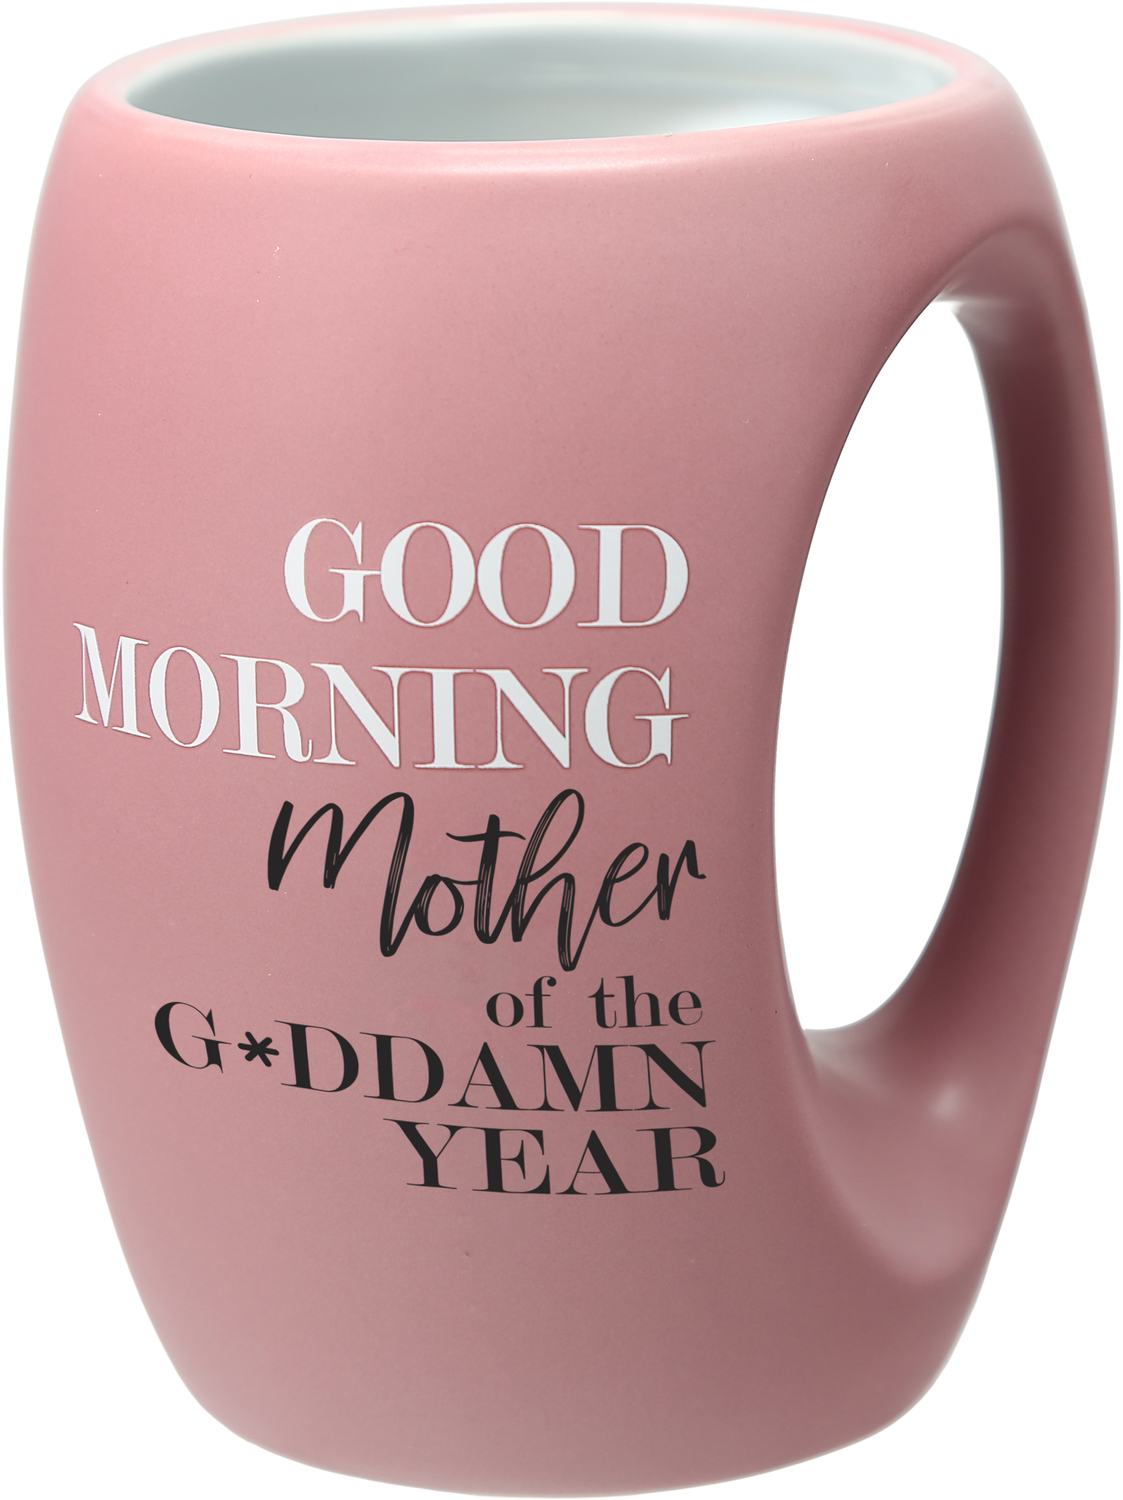 Mother Of The Year by Good Morning - Mother Of The Year - 16 oz Cup